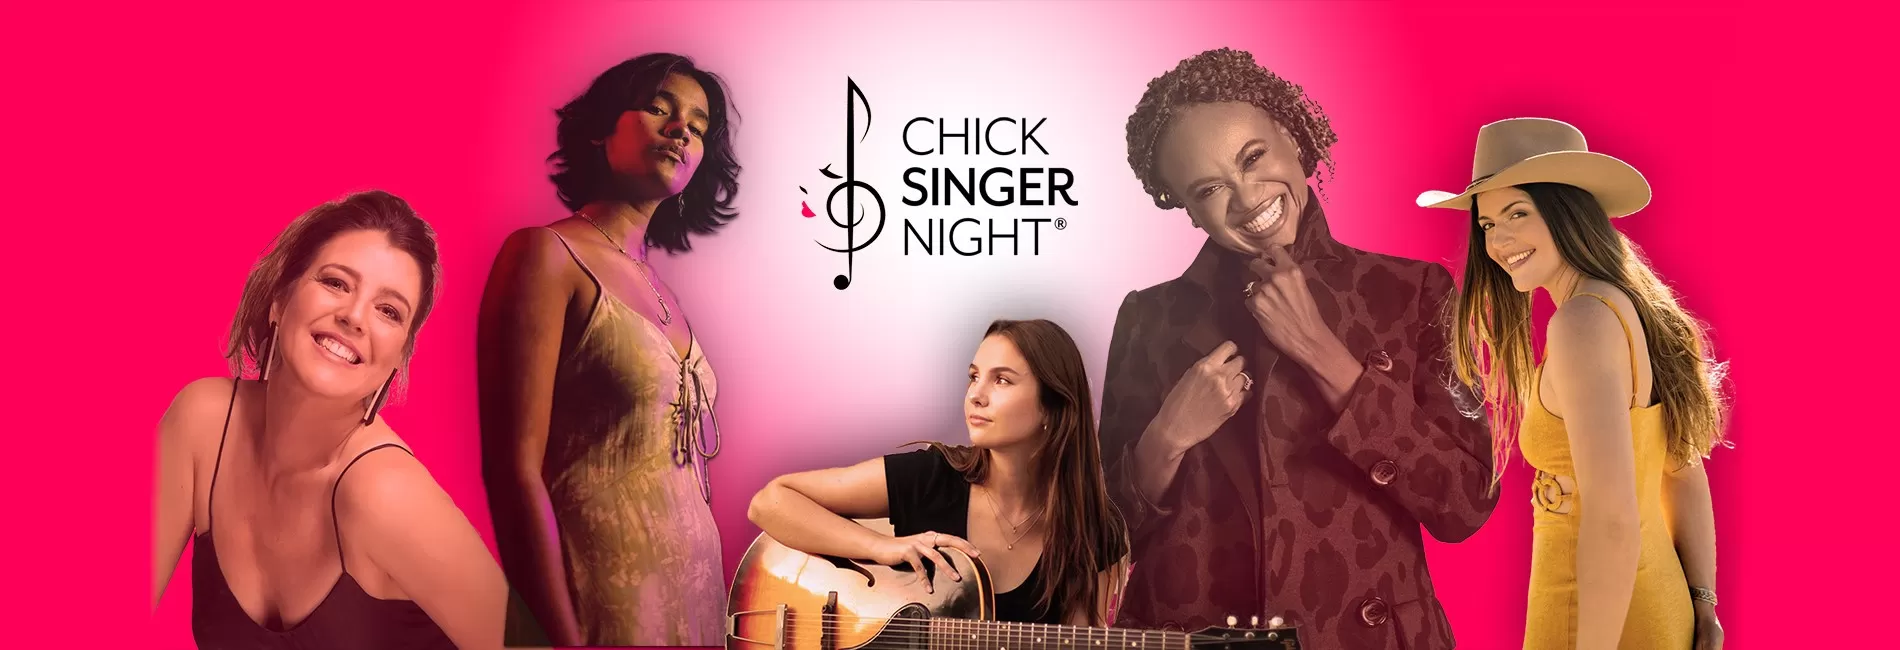 Chick Singer Night presented by Breathe - A Foundation for the Artist